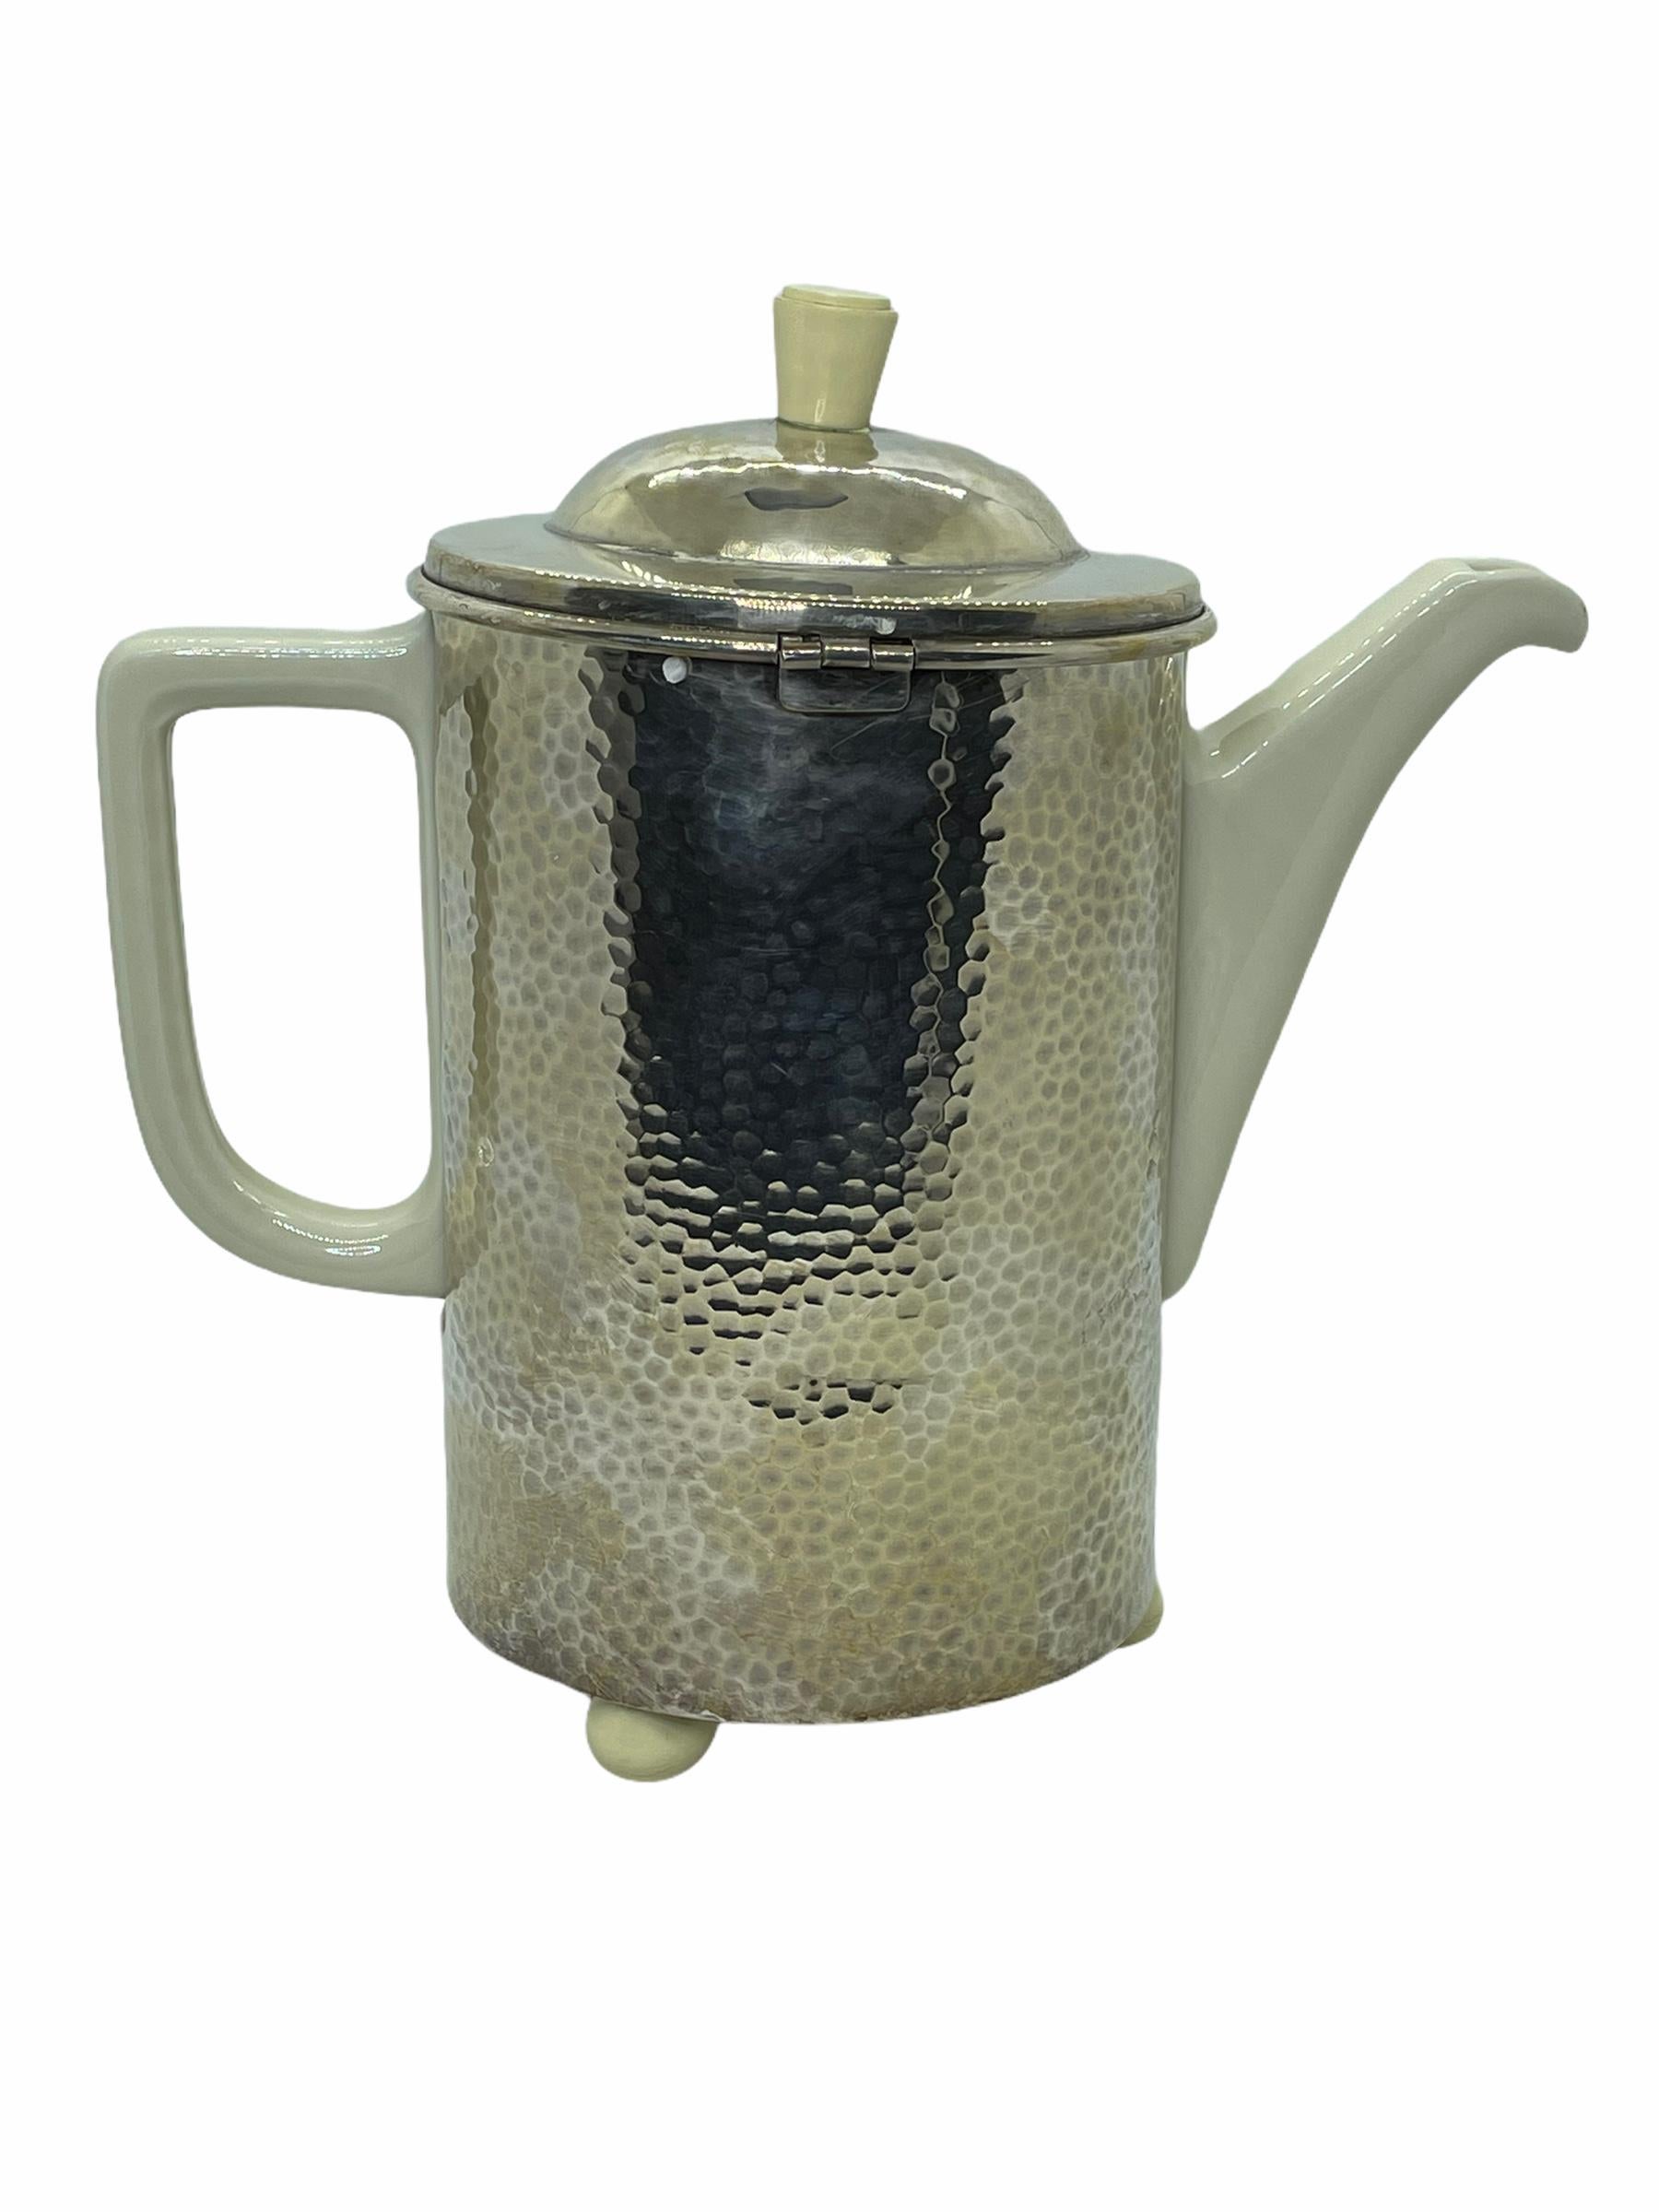 Art Deco Bauhaus Hutschenreuther coffee pot hammered WMF metal cozy this handsome vintage coffee pot marked Hutschenreuther Bavaria Germany is snugly nestled in a WMF D.R.P. hammered silver-clad over copper cozy, and lined with a charcoal grey wool